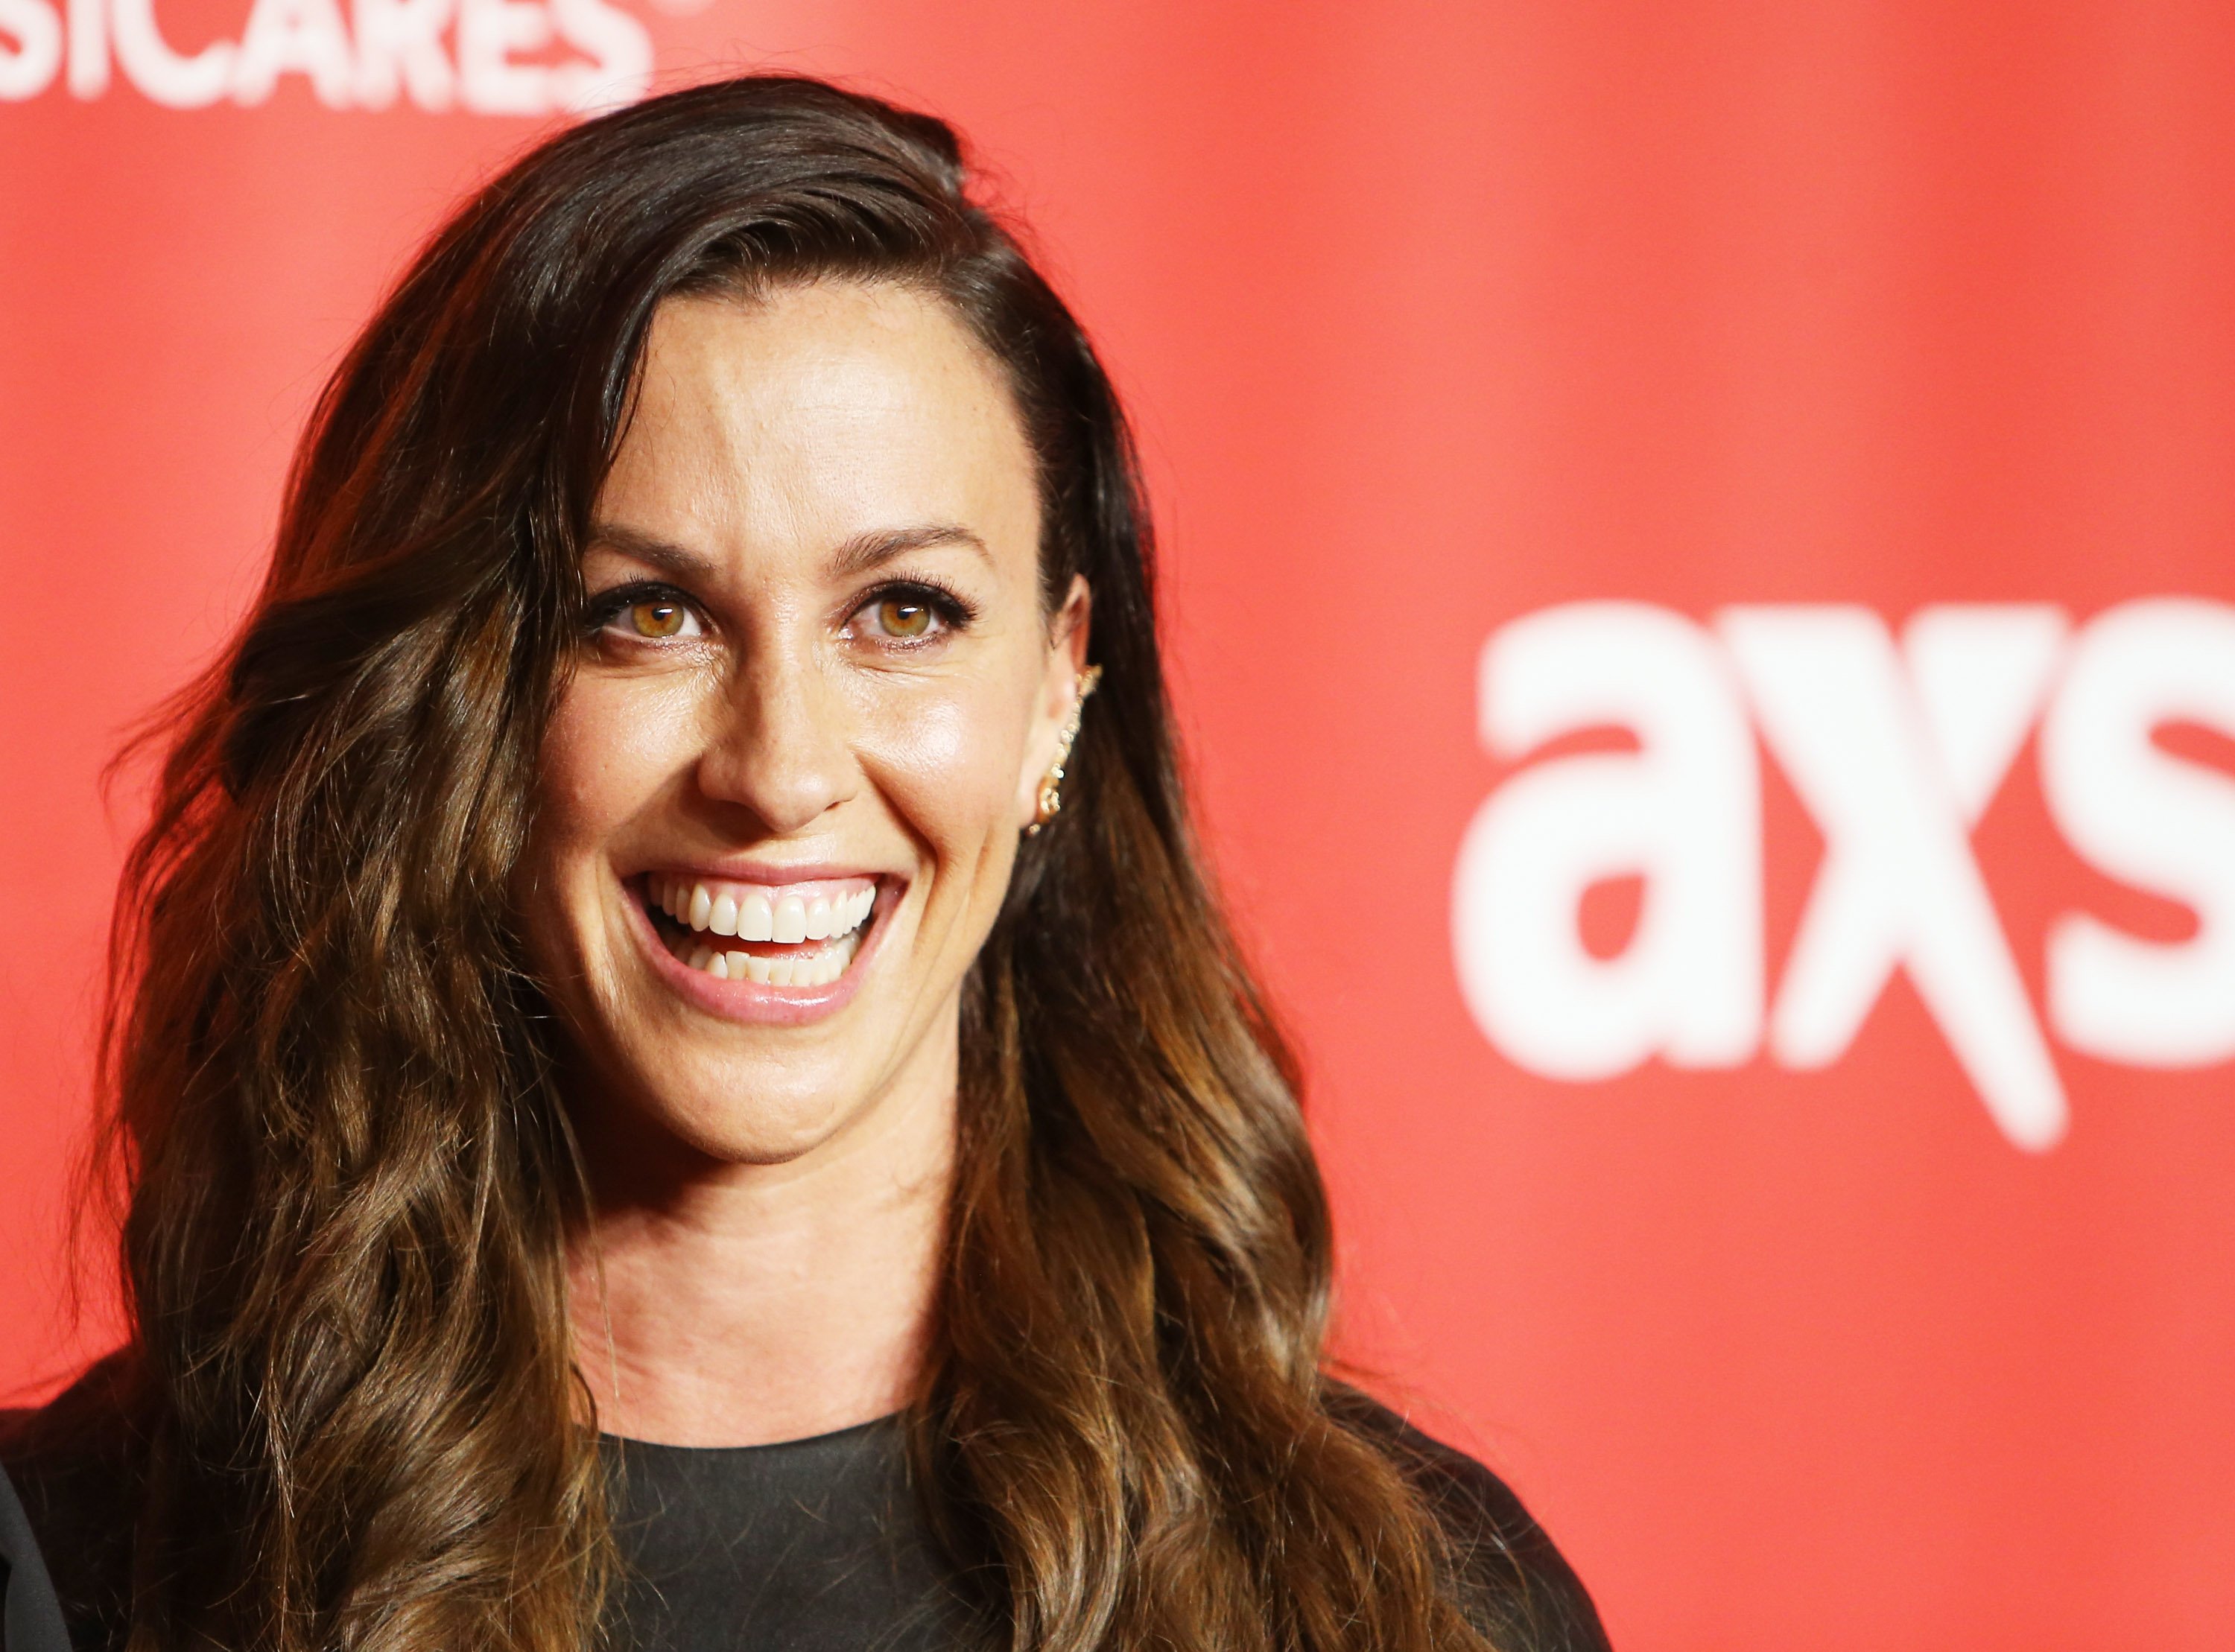 Alanis Morissette smiles for a photo on the red carpet